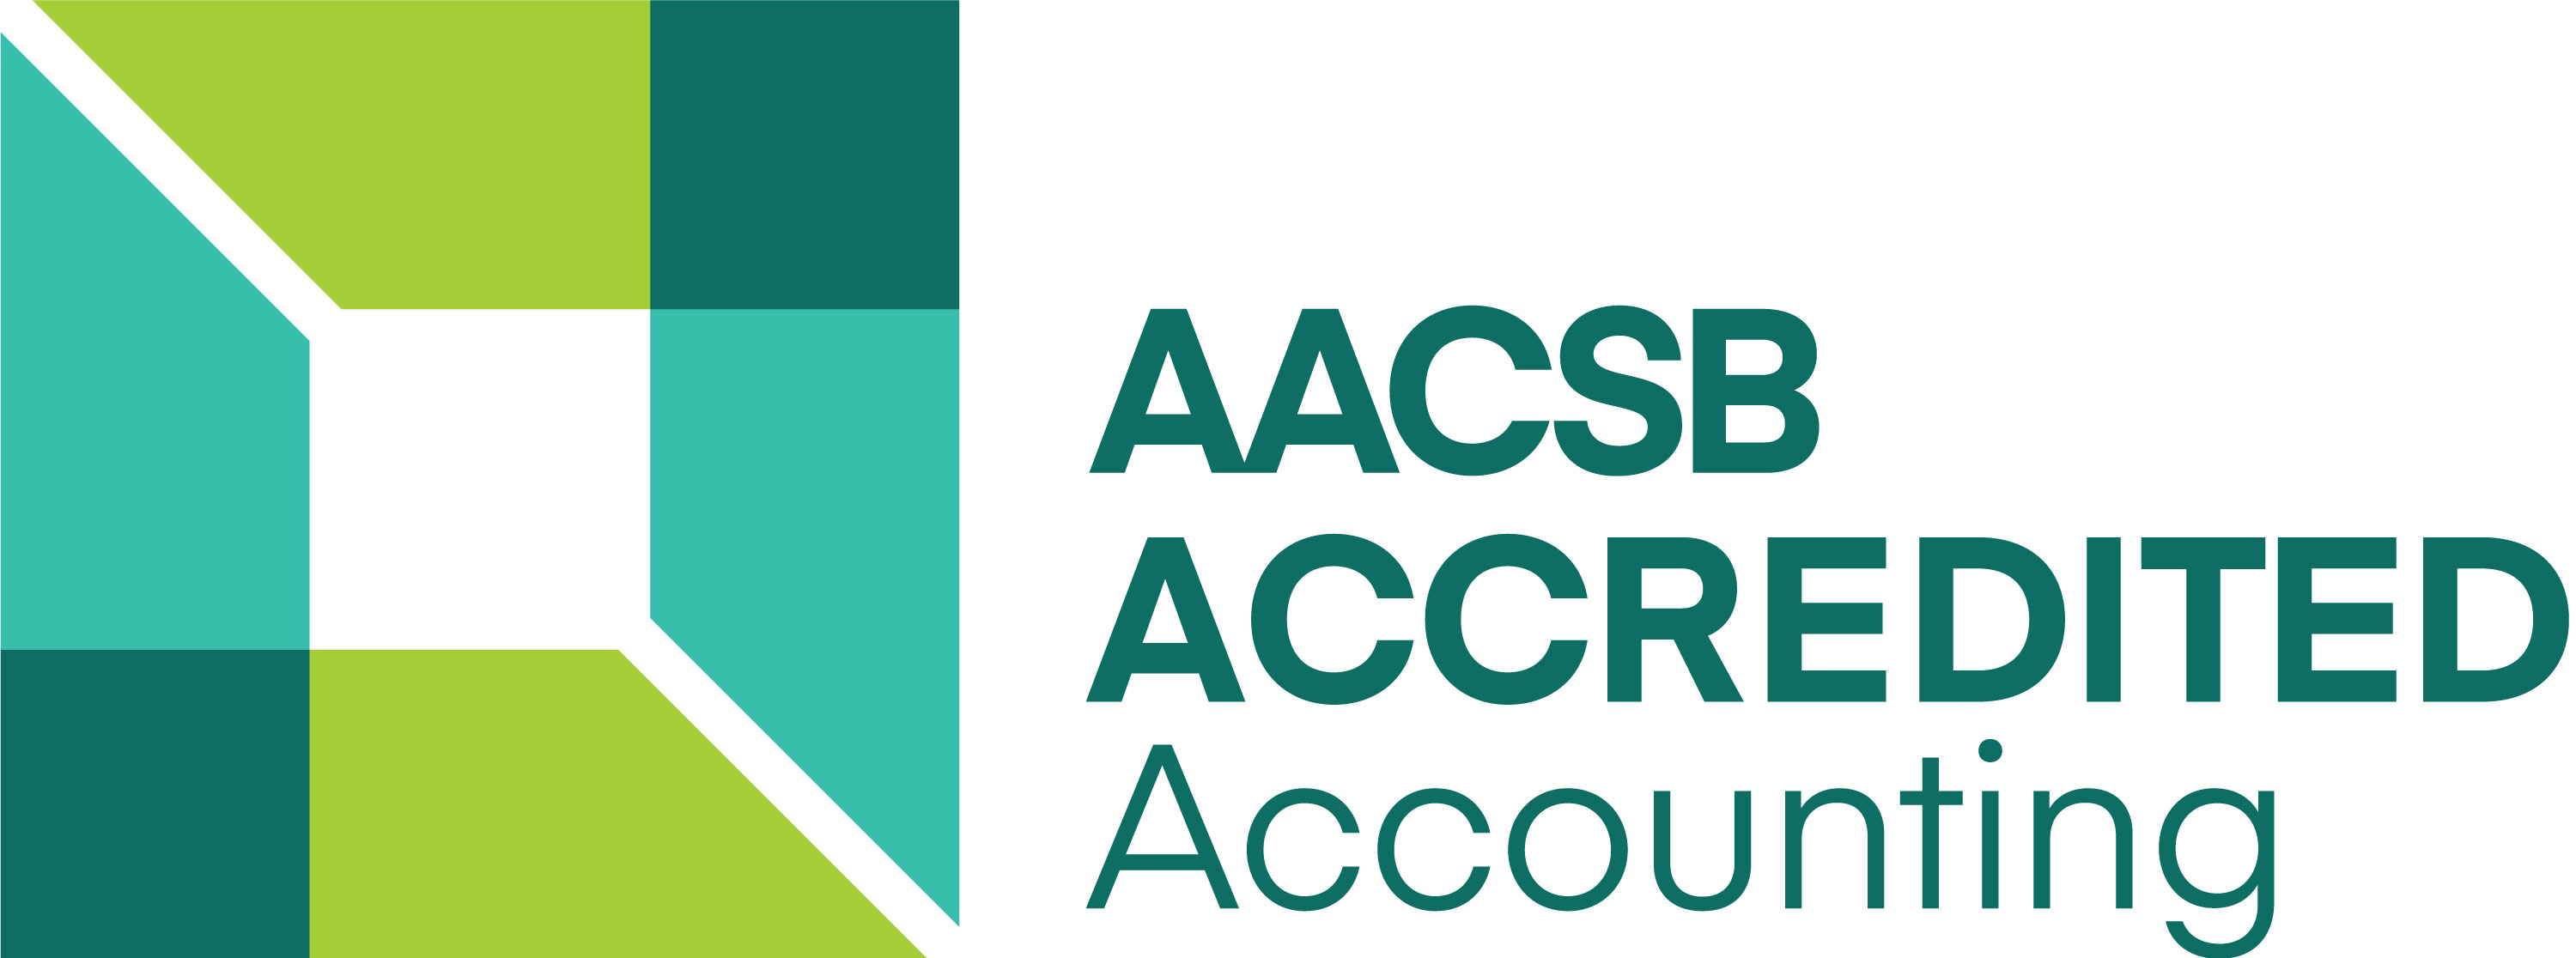 AACSB ACCREDITED ACCOUNTING